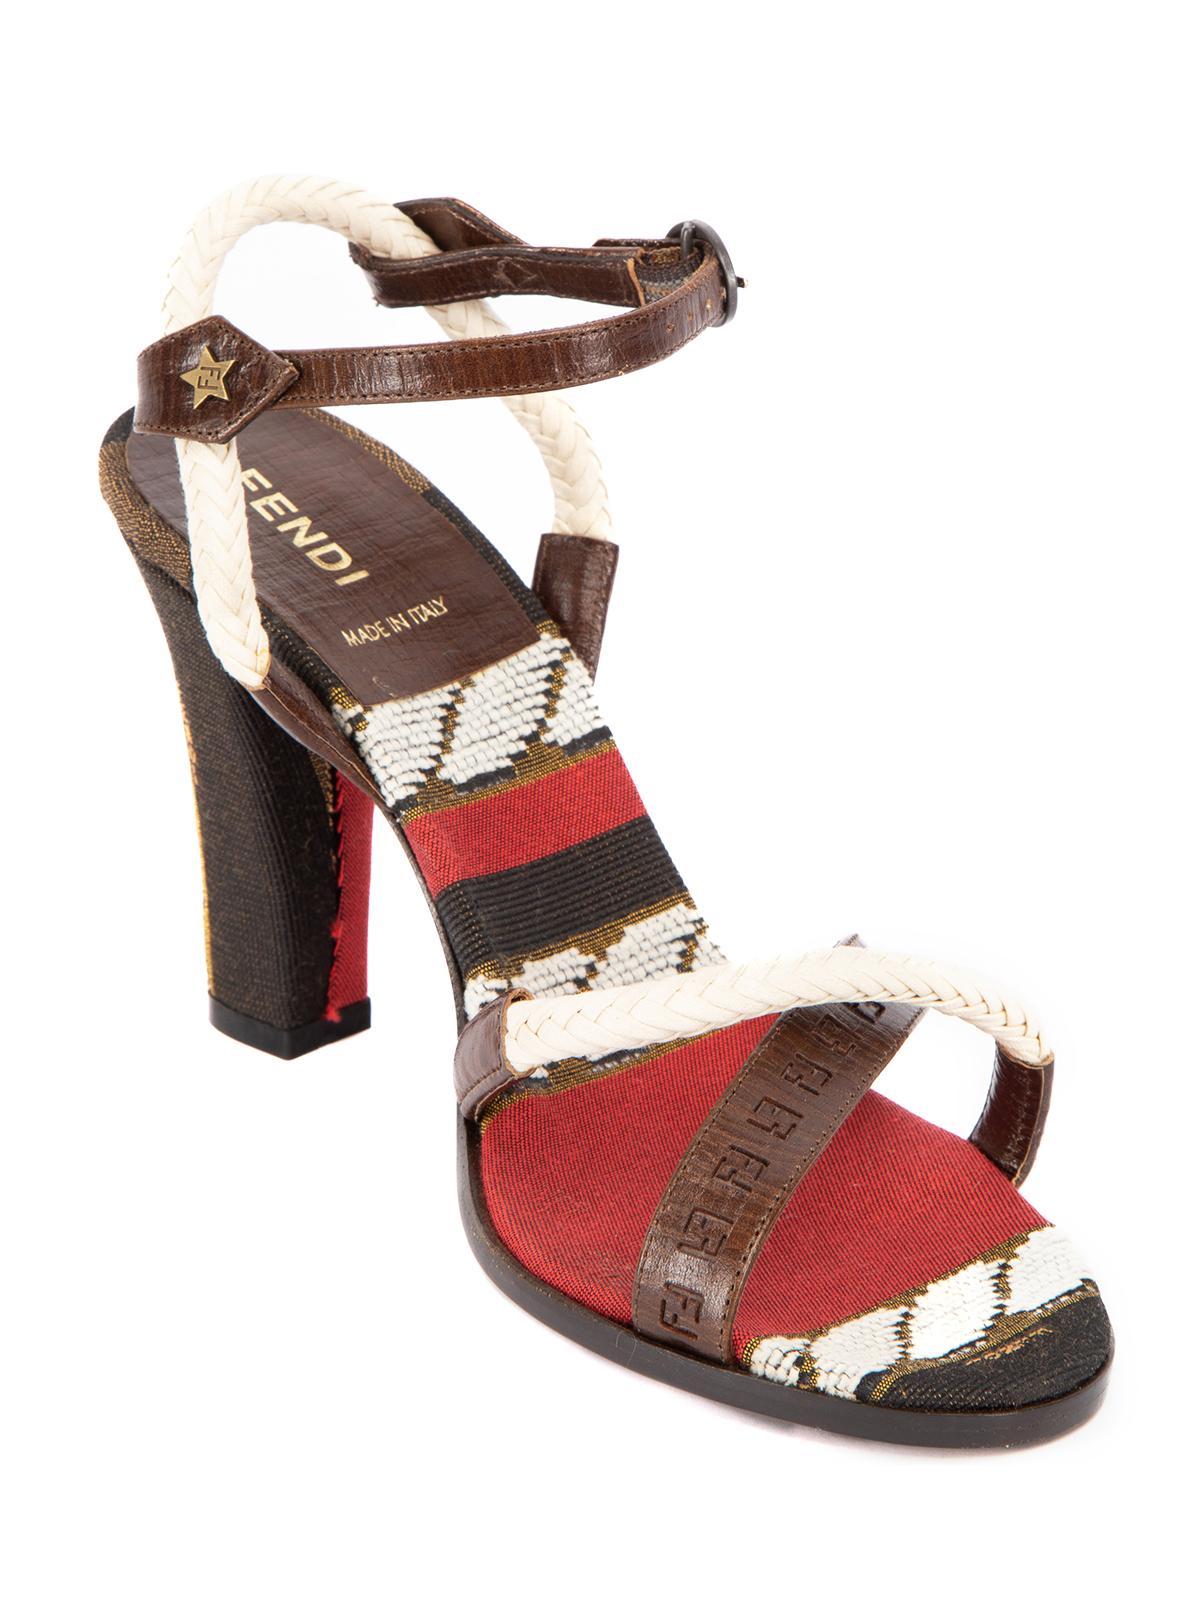 CONDITION is Very Good. Hardly any wear to sandal is evident. The leather insole patch on the right foot has come undone on this used Fendi designer resale item.   Details  Multicoloured Leather and canvas  Open toe  Strap details  High heel  Logo